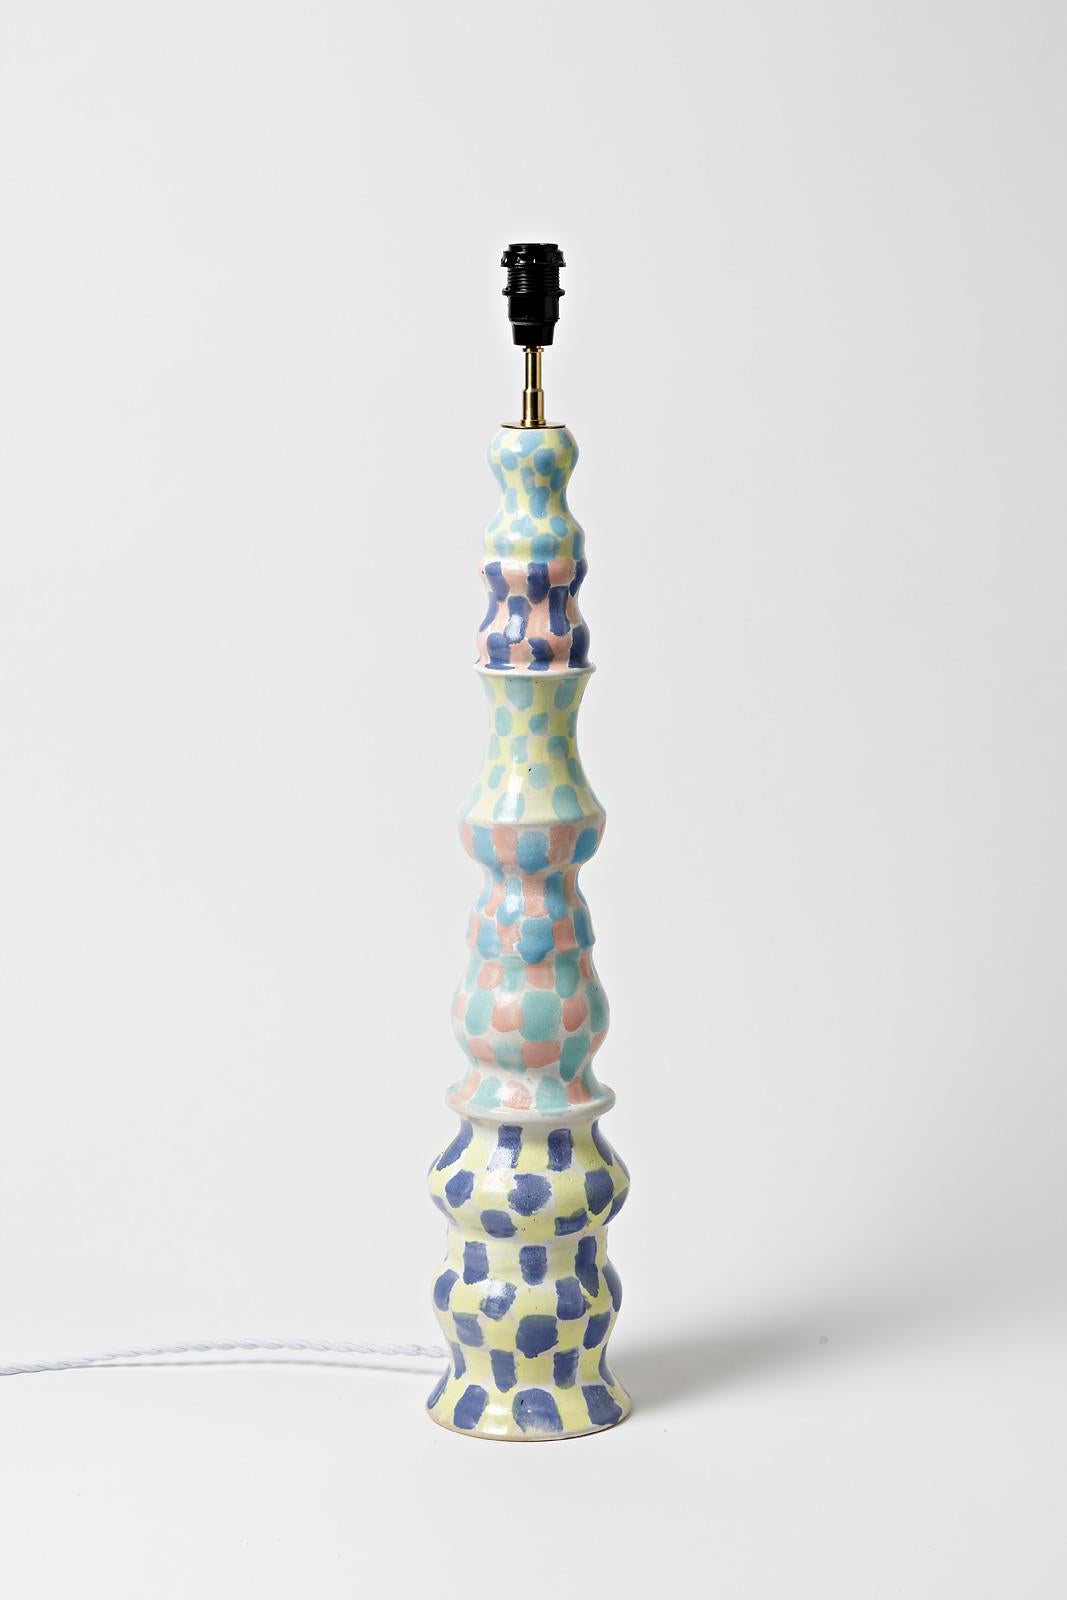 Mathilde Sauce

Unique piece, realised in 2021

Large stoneware ceramic table lamp

Blue, white and yellow ceramic glazes colors

Electrical system is new

Signed under the base

Ceramic measures - height : 55 cm Large : 12 cm
Measures